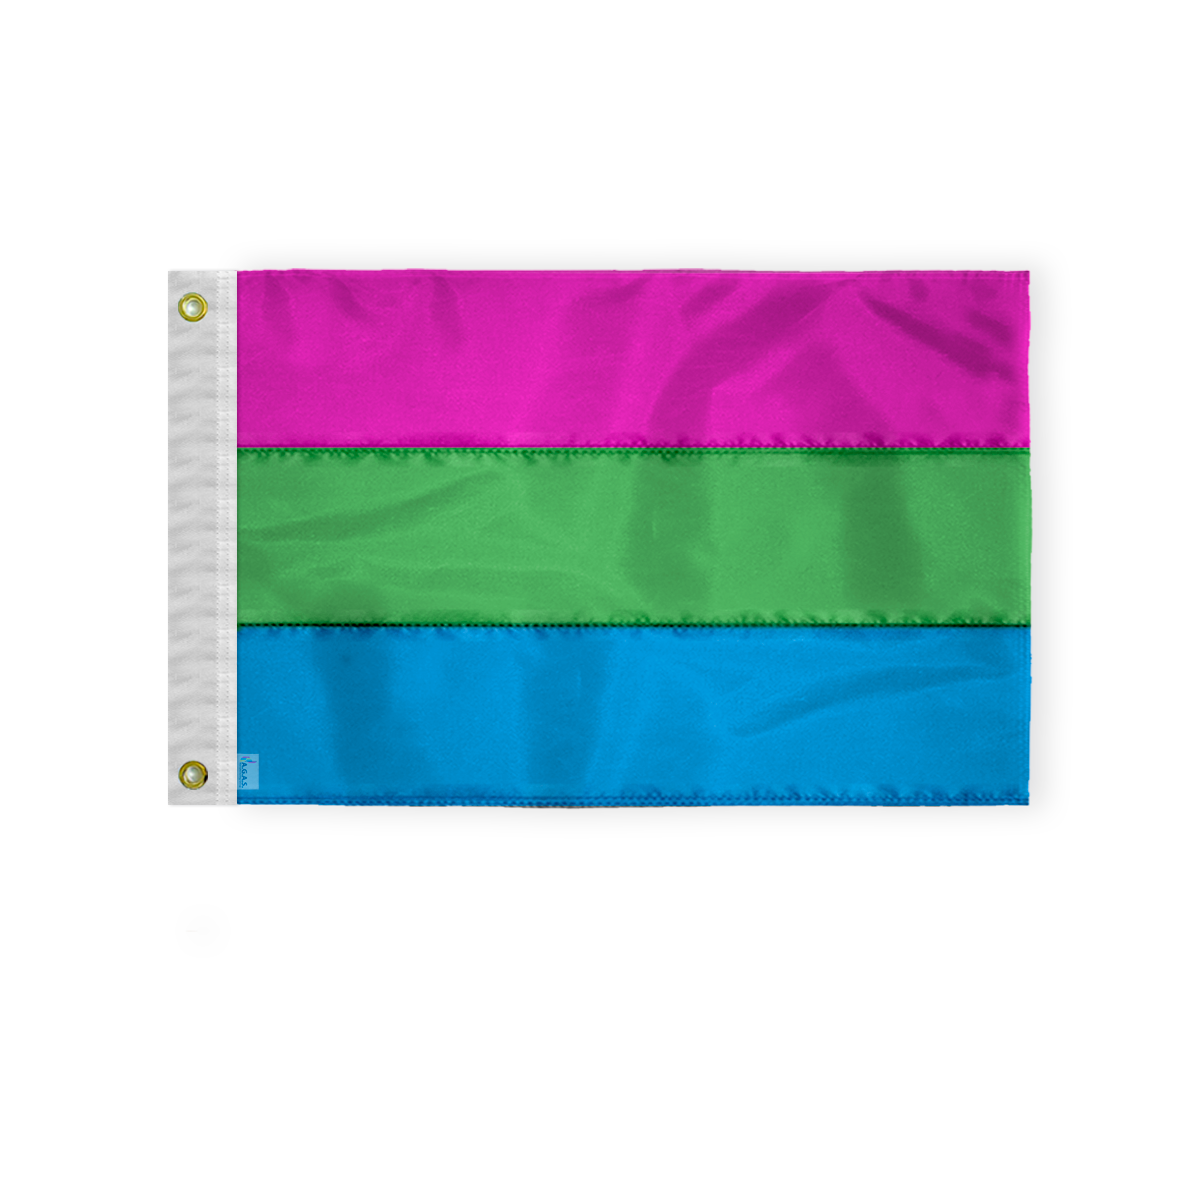 AGAS Small Polysexual Pride Boat Nautical Flag 12x18 Inch